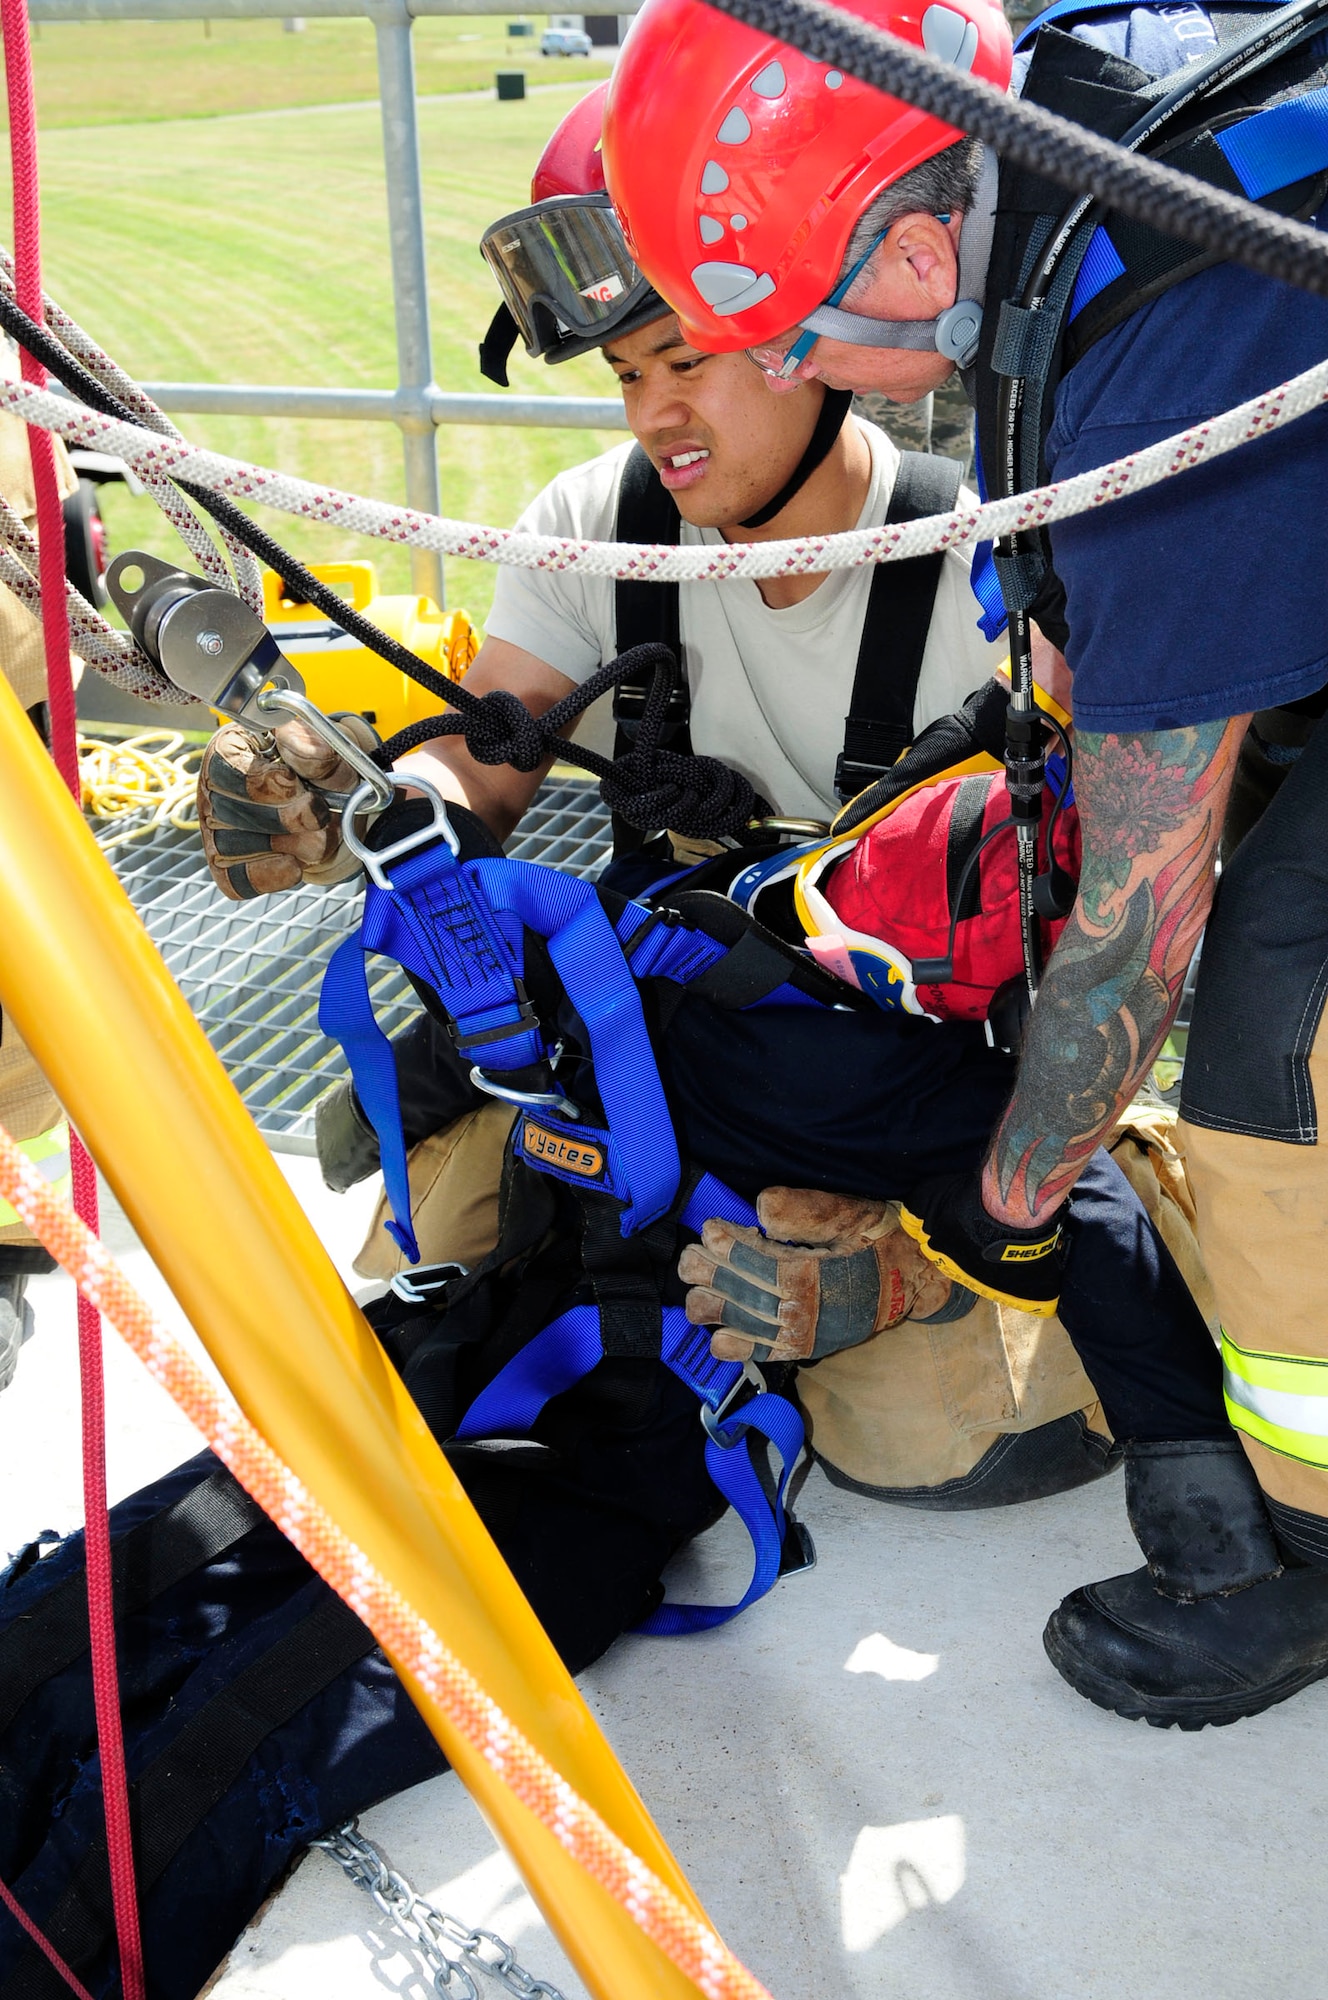 U.S. Air Force Staff Sgt. Anthony Thlang, left, 100th Civil Engineer Squadron Fire Department crew chief from Seattle, and Paul Cusden, 100th CES Fire Department firefighter from Ramsgate, Kent, England, remove a simulated victim from a confined space during training June 26, 2014, on RAF Mildenhall, England. The training was part of a U.S. Air Forces in Europe inspection where a simulated child was trapped inside a pipe and firefighters responded to the scene. (U.S. Air Force photo/Karen Abeyasekere/Released)